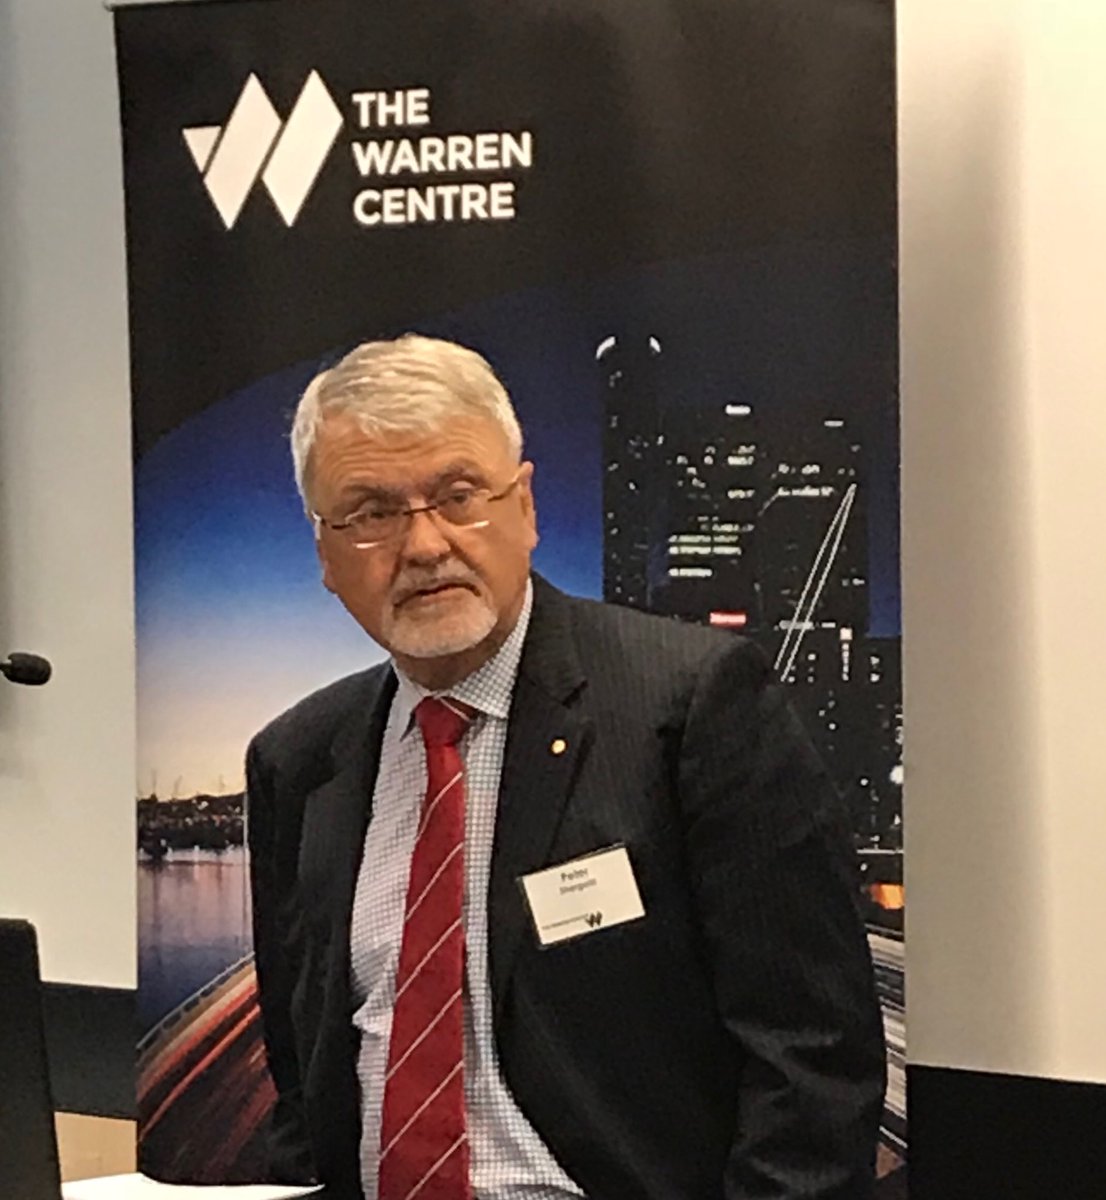 Excellent to have Professor Peter Shergold AC to launch ⁦@thewarrencentre⁩ #FireSafety project #twcinnovation